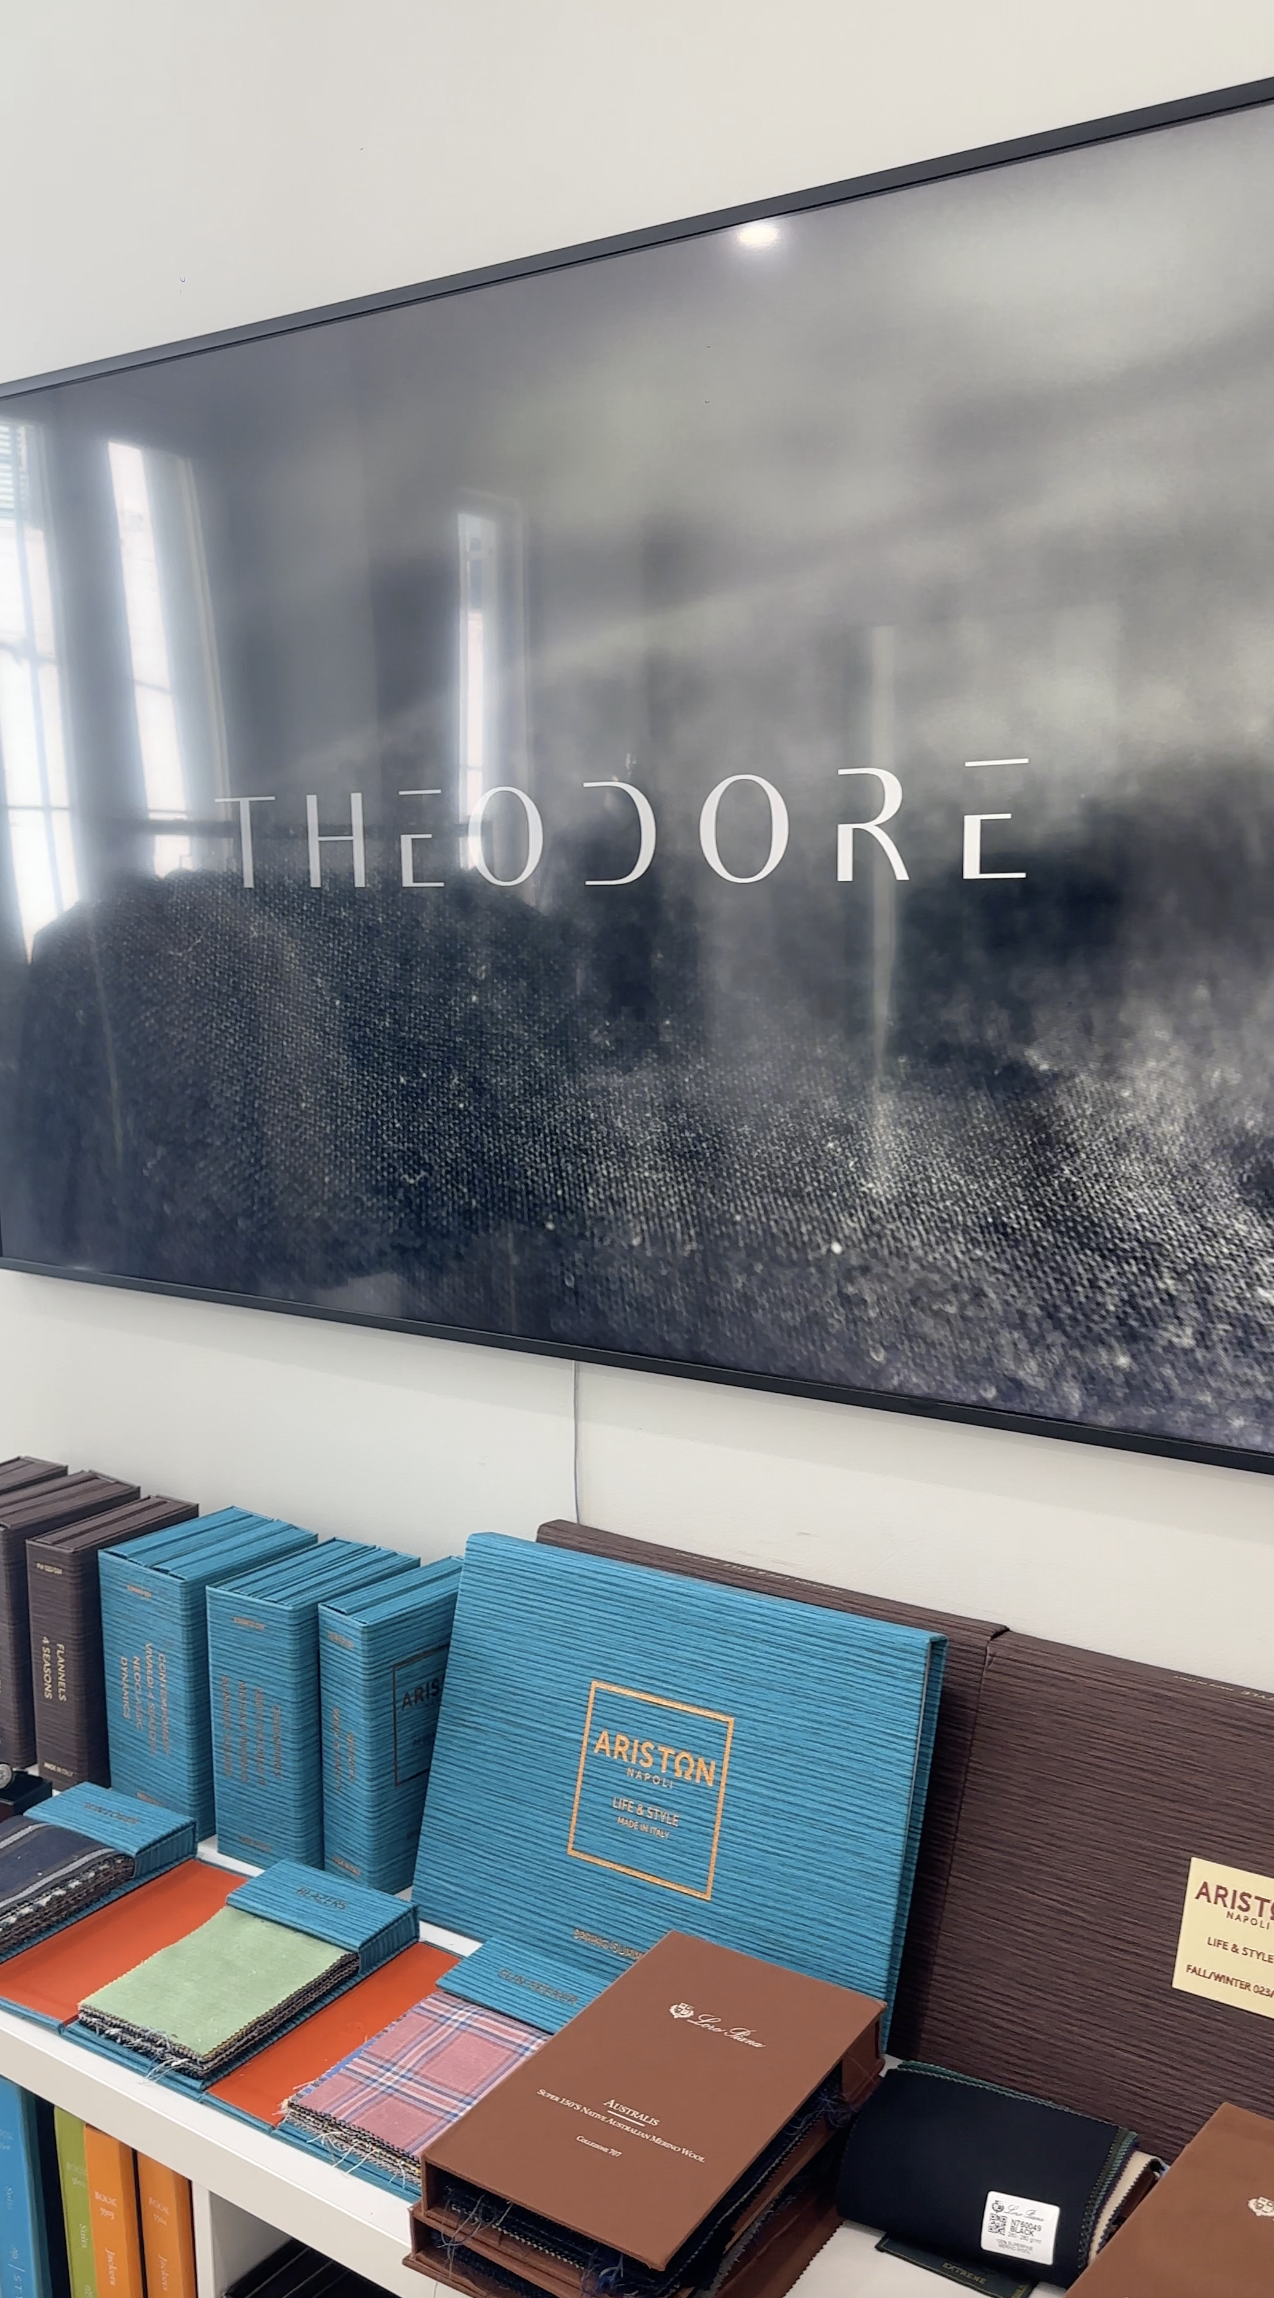 Sign reading &quot;THEODORE&quot; above shelves with various hardcover books